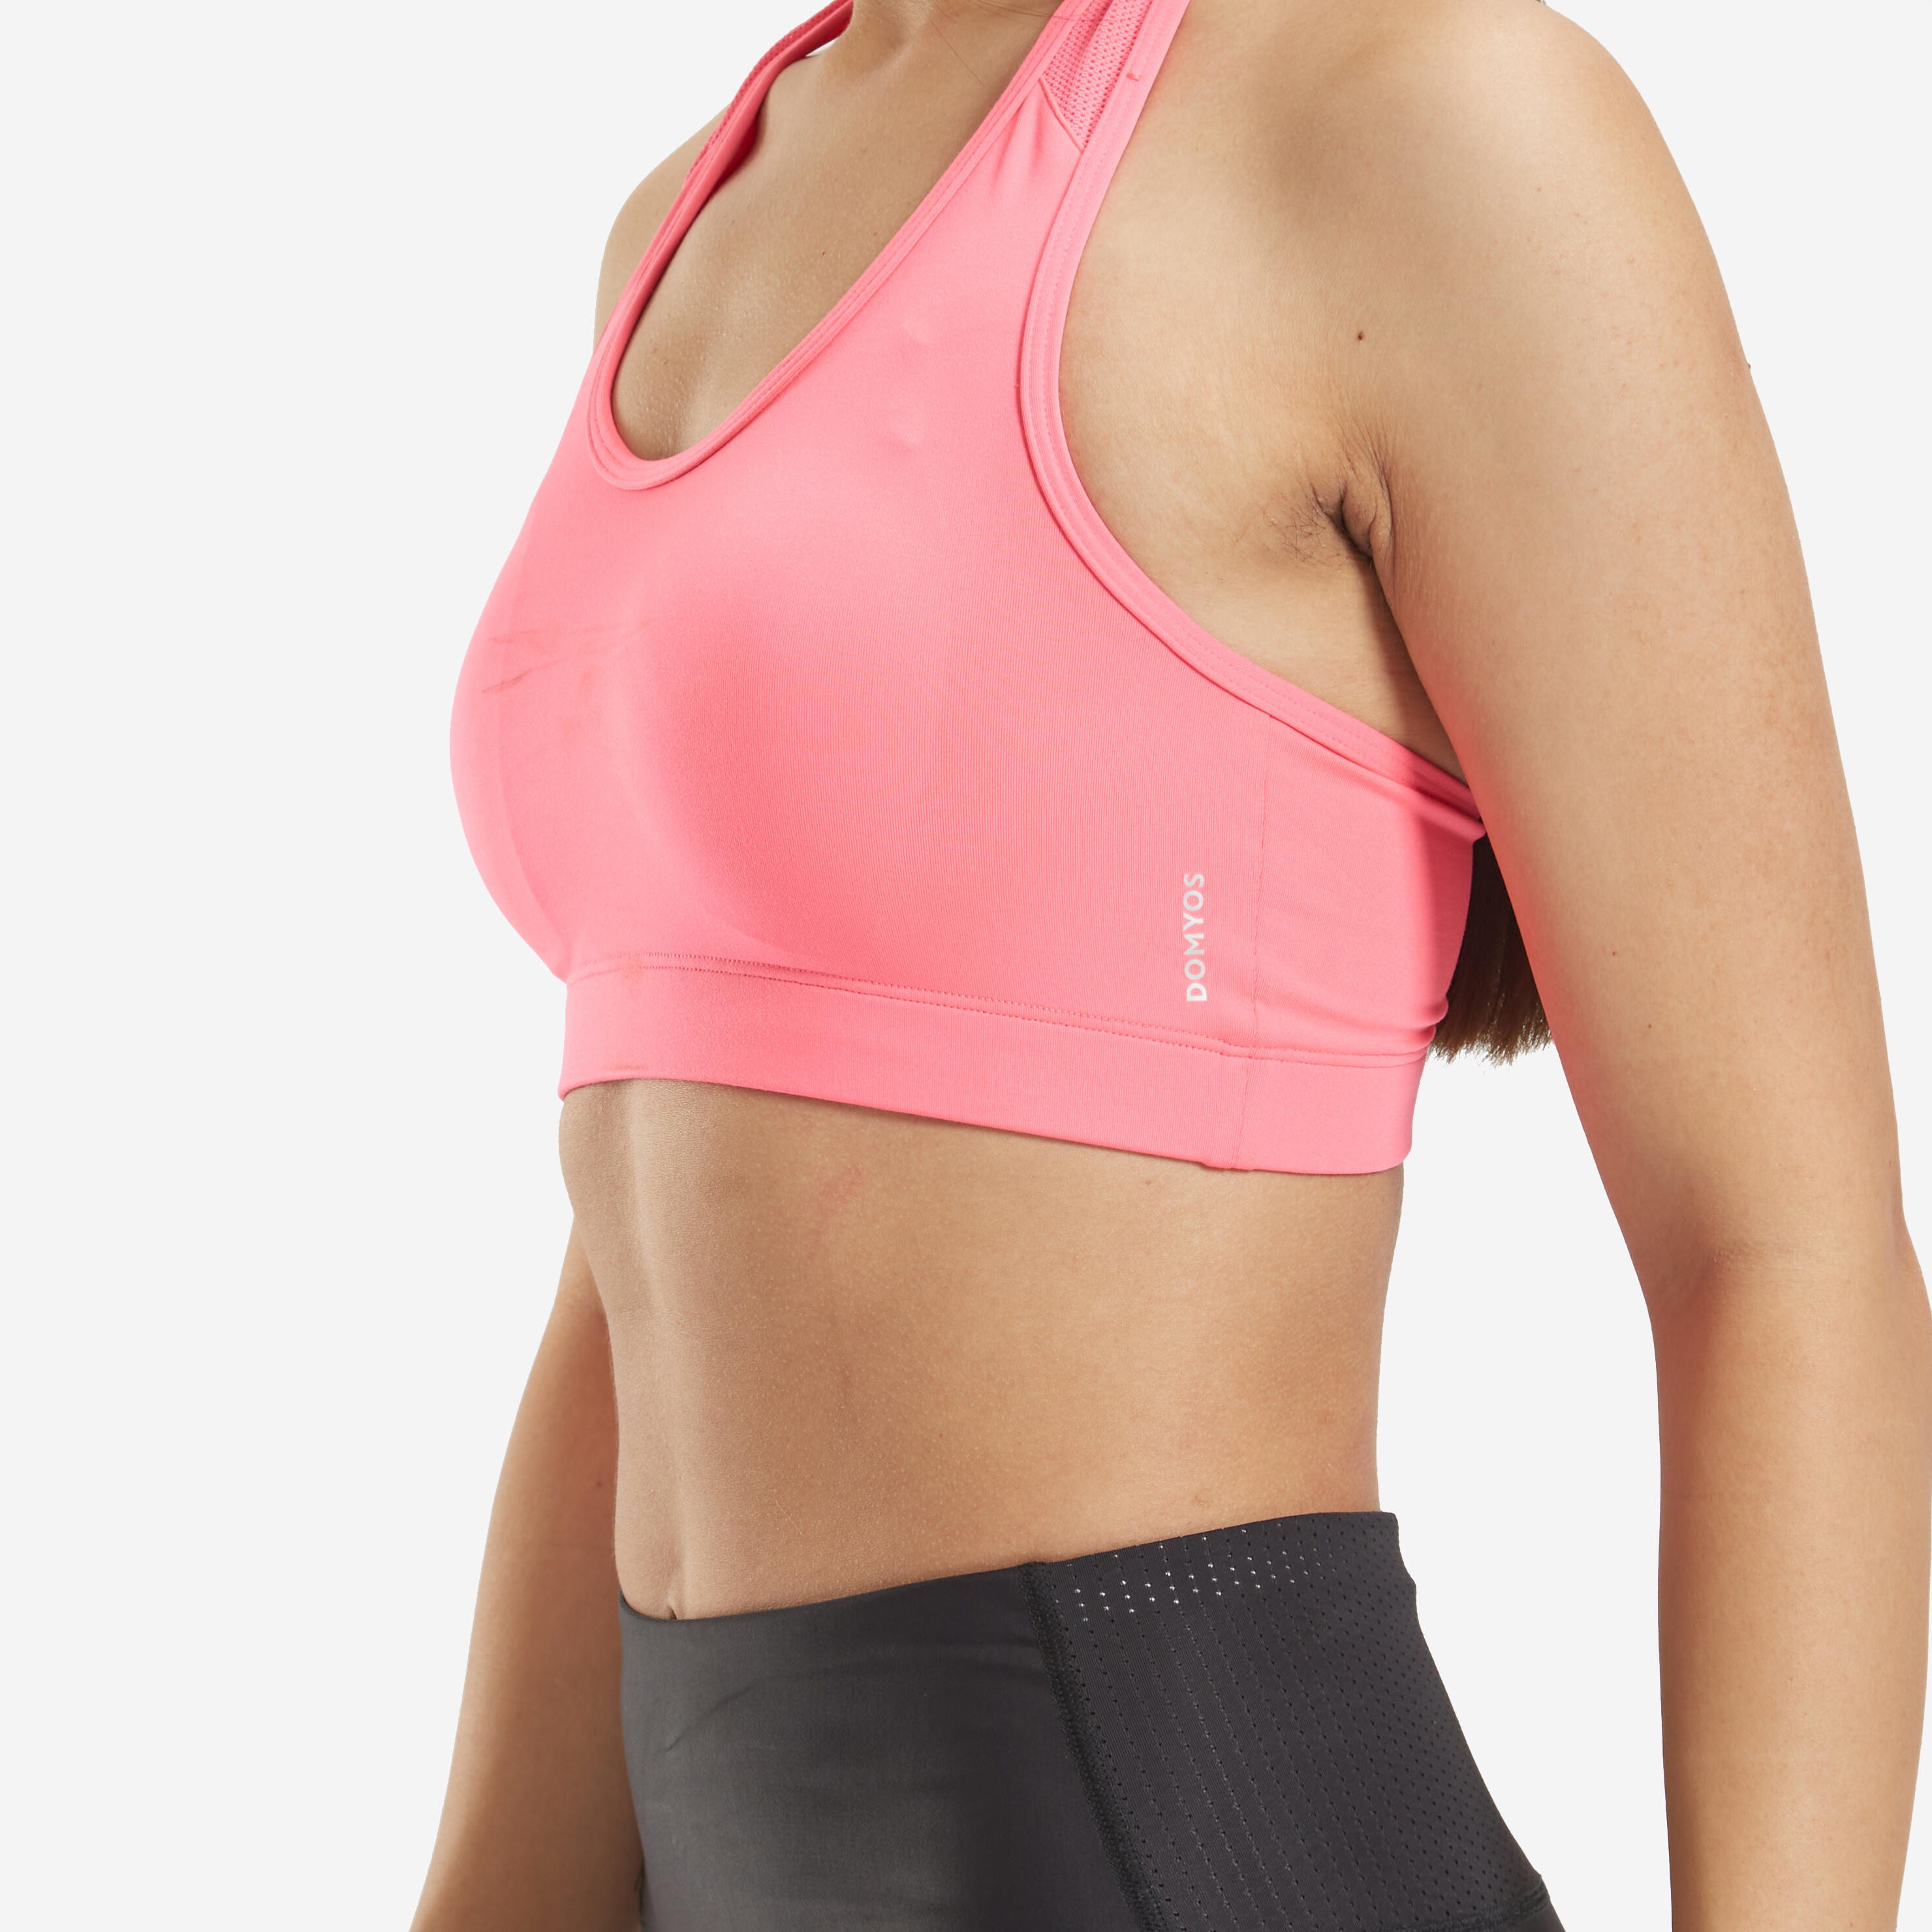 Decathlon Sports India - The PRICE DROP is back again at DECATHLON HENNUR  ROAD 🥳 Now grab your favourite sports products at festive prices 😊  Fitness cardio training sports bra starting from